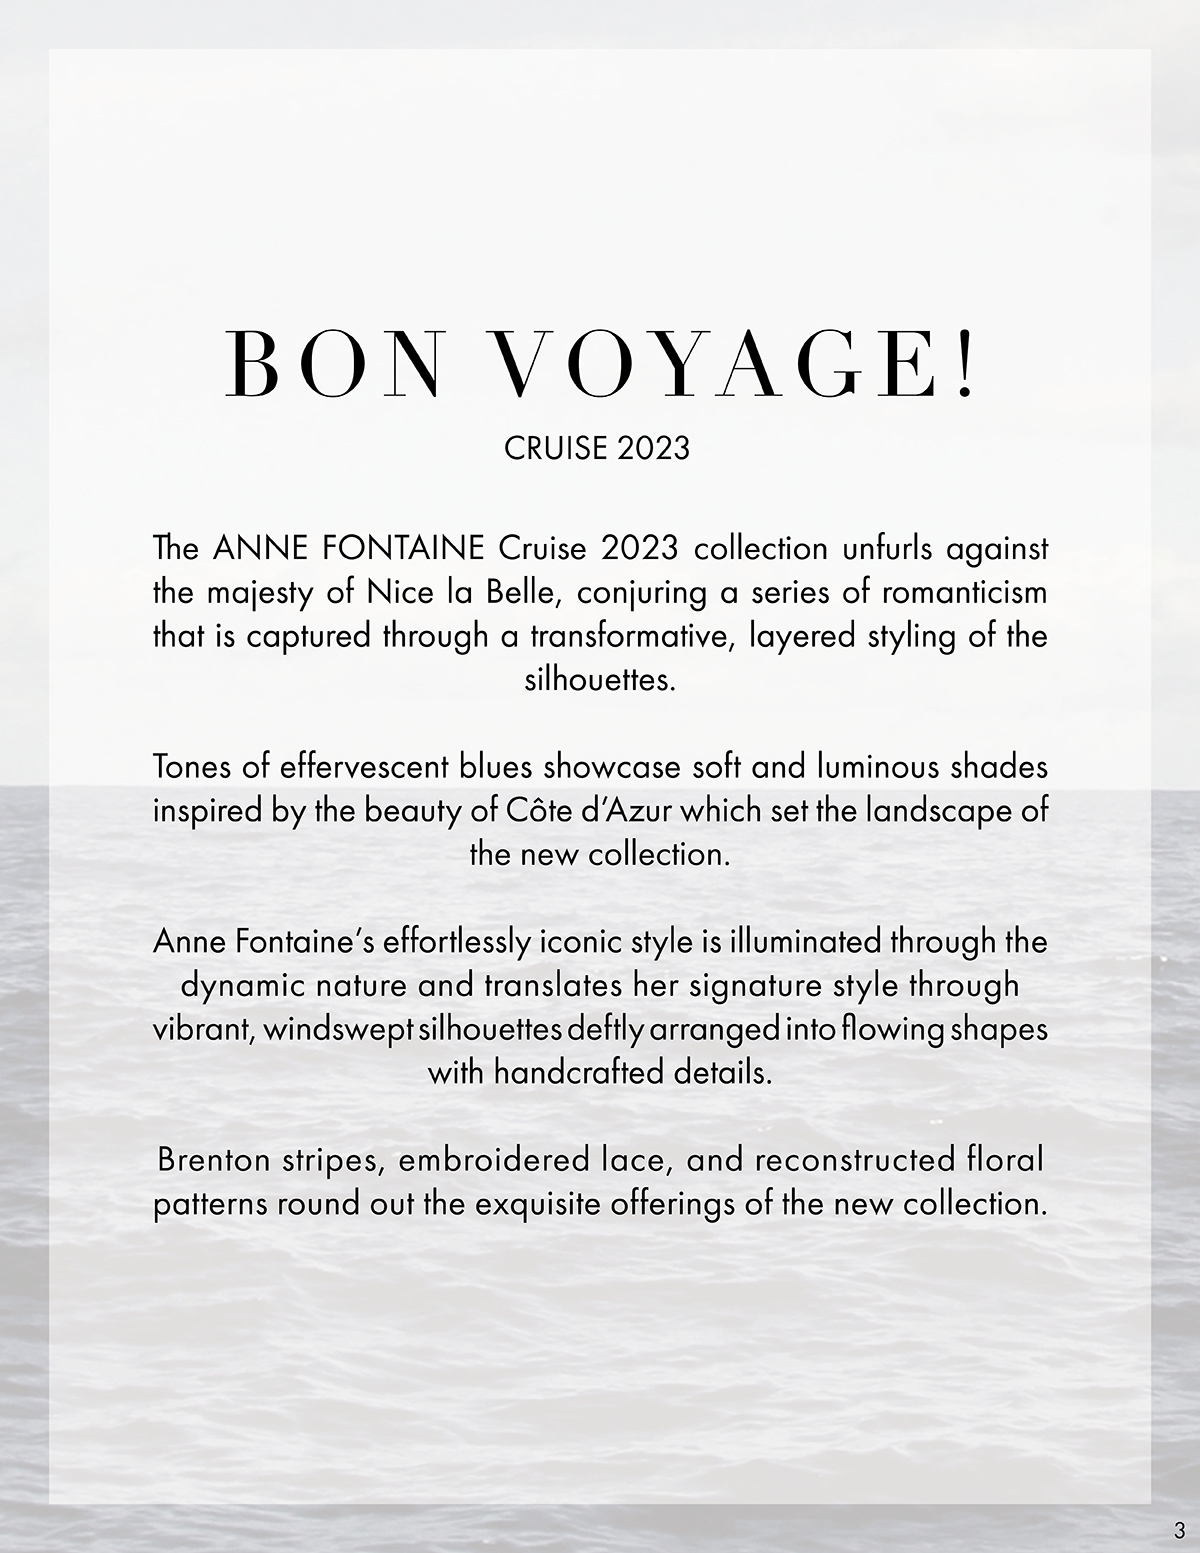 Discover the 2023 Cruise collection from ANNE FONTAINE